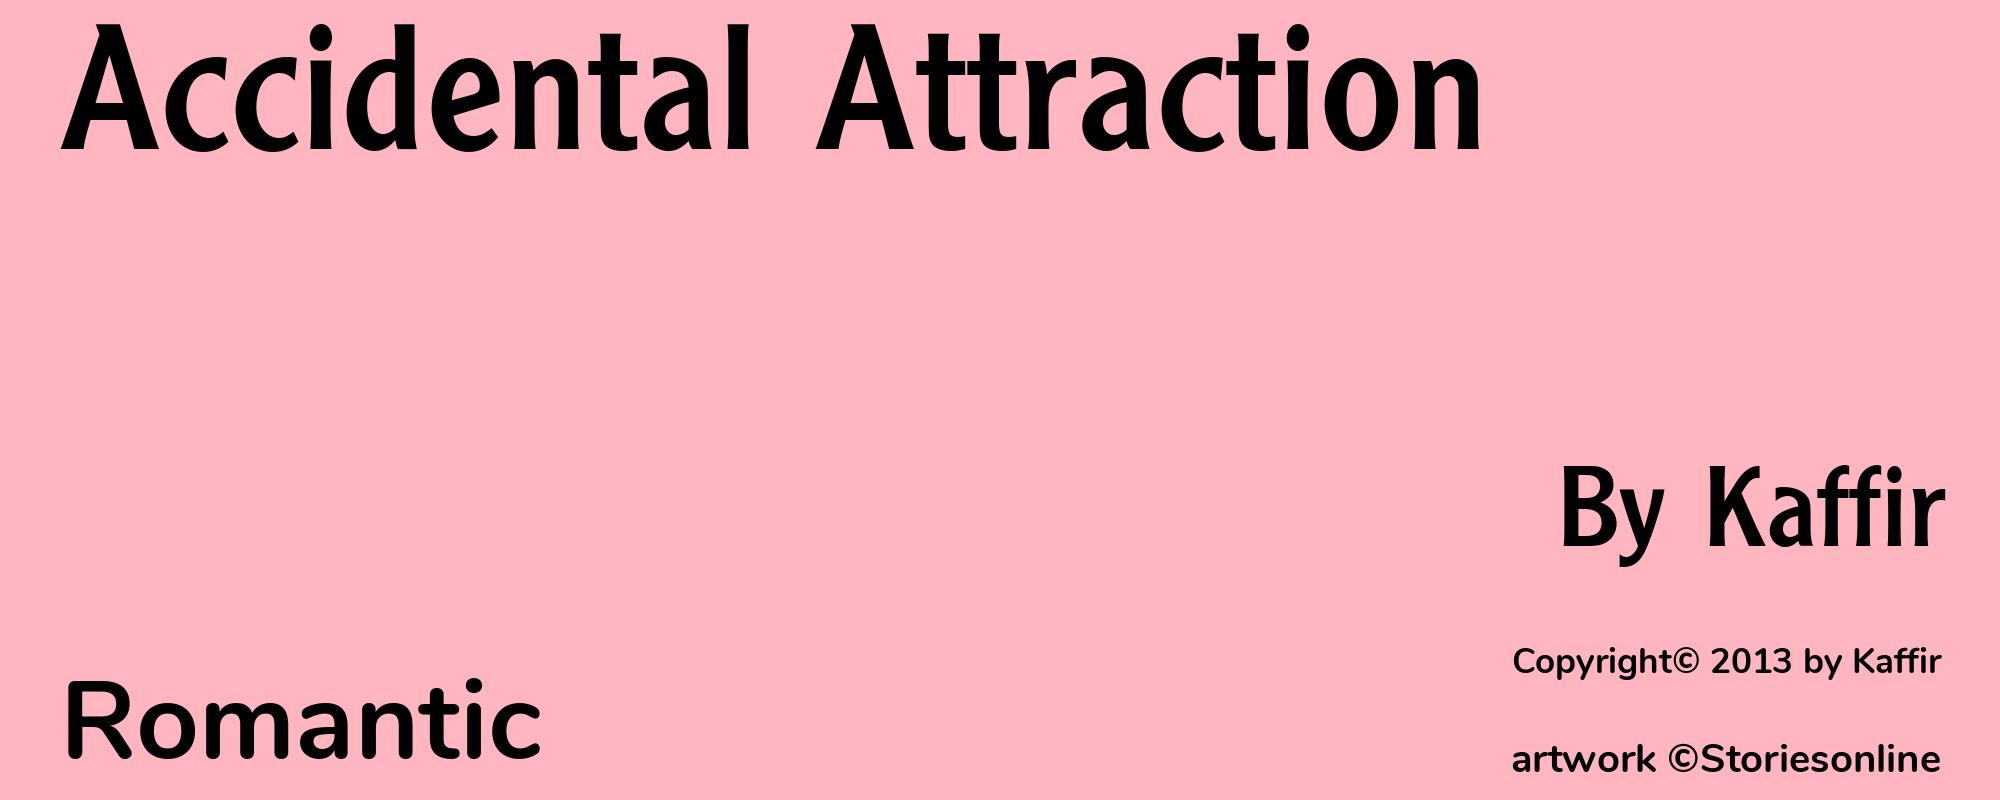 Accidental Attraction - Cover